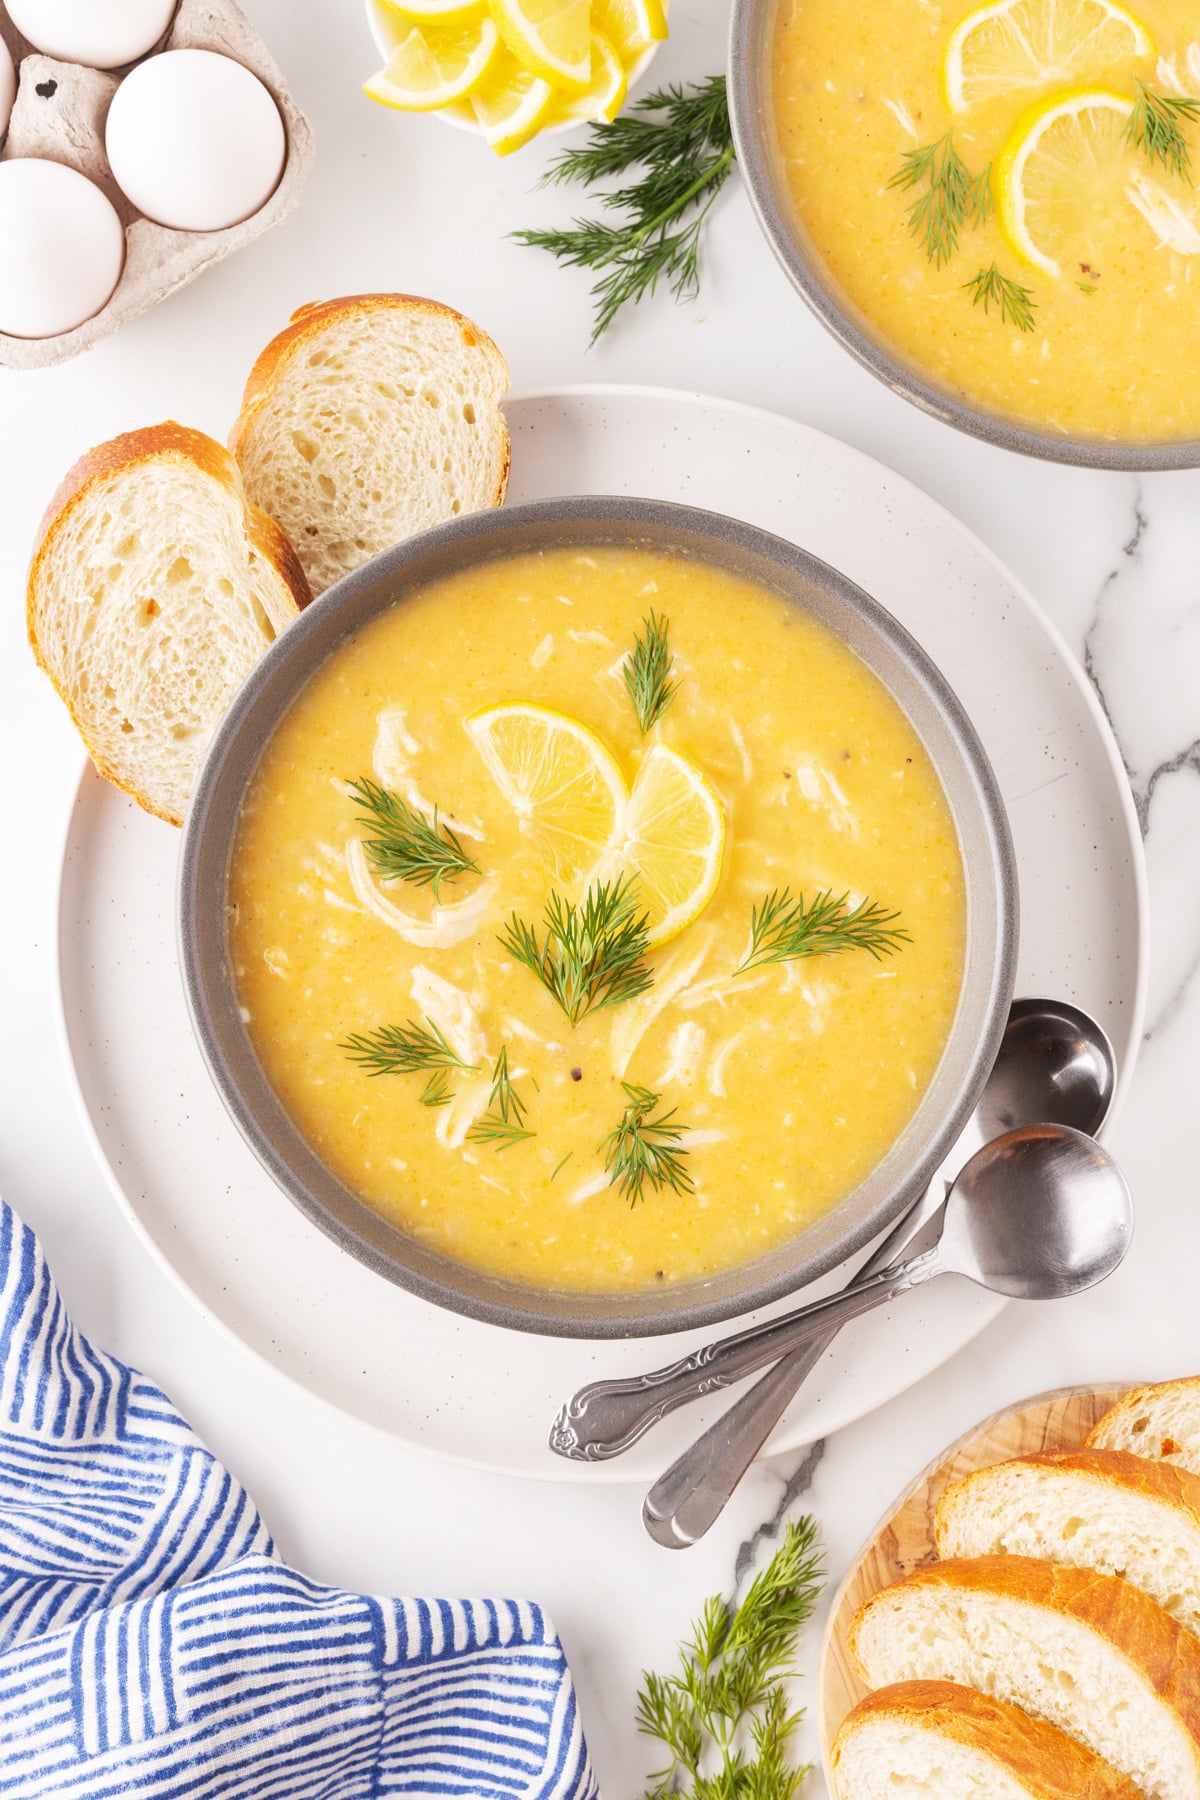 Bowls of Avgolemono Soup with eggs, lemon slices and bread. 